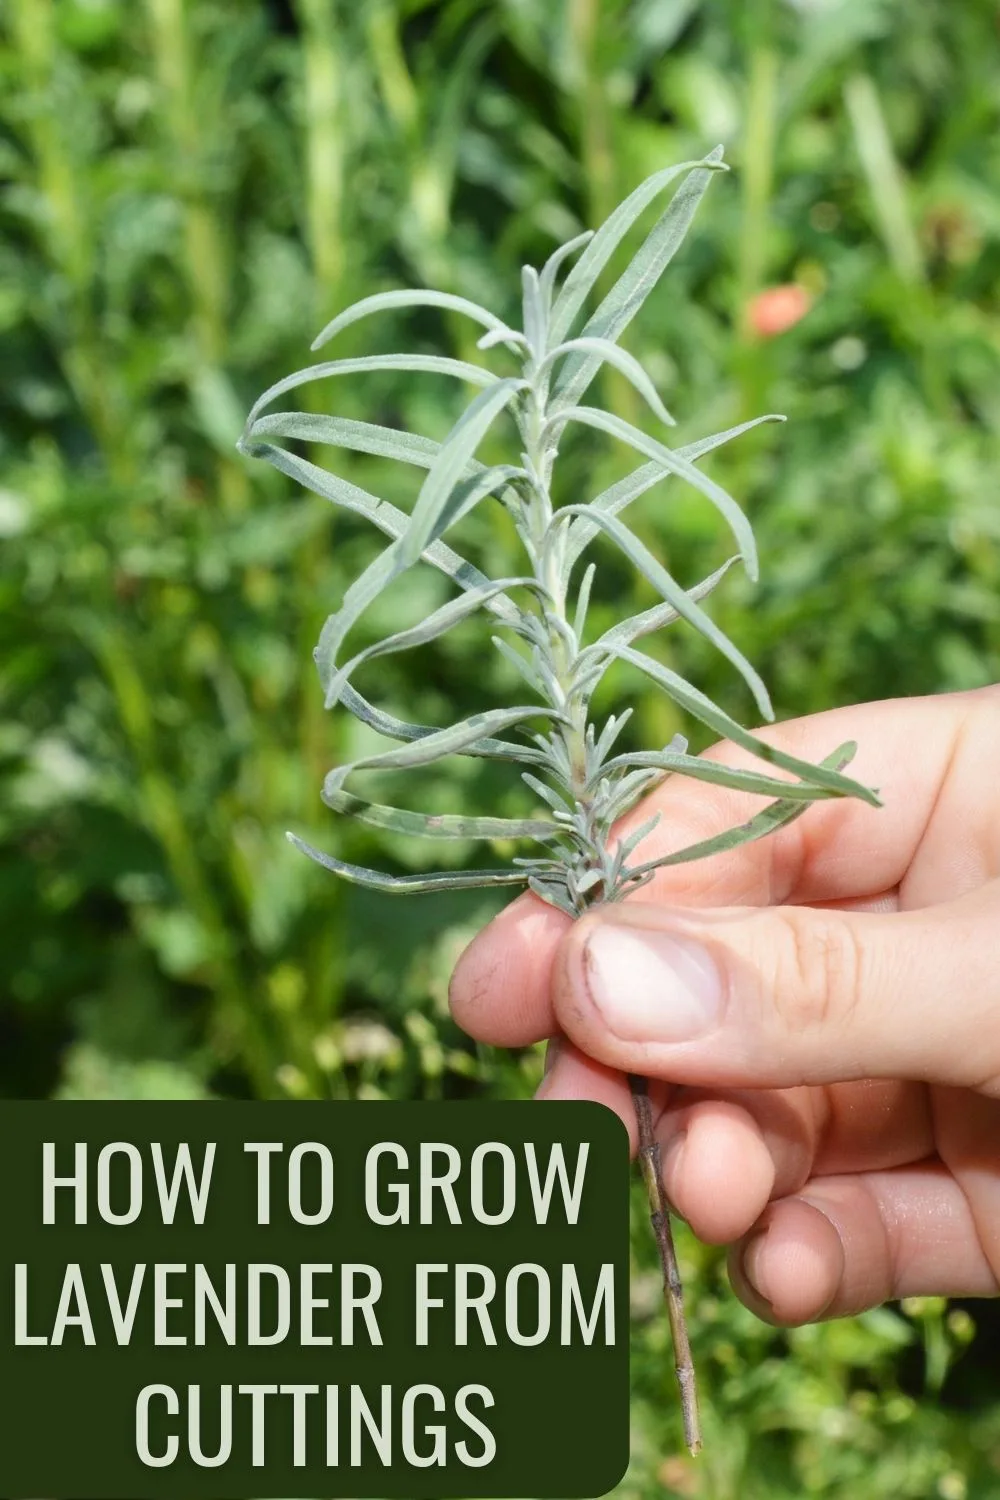 How to propagate lavender from cuttings.